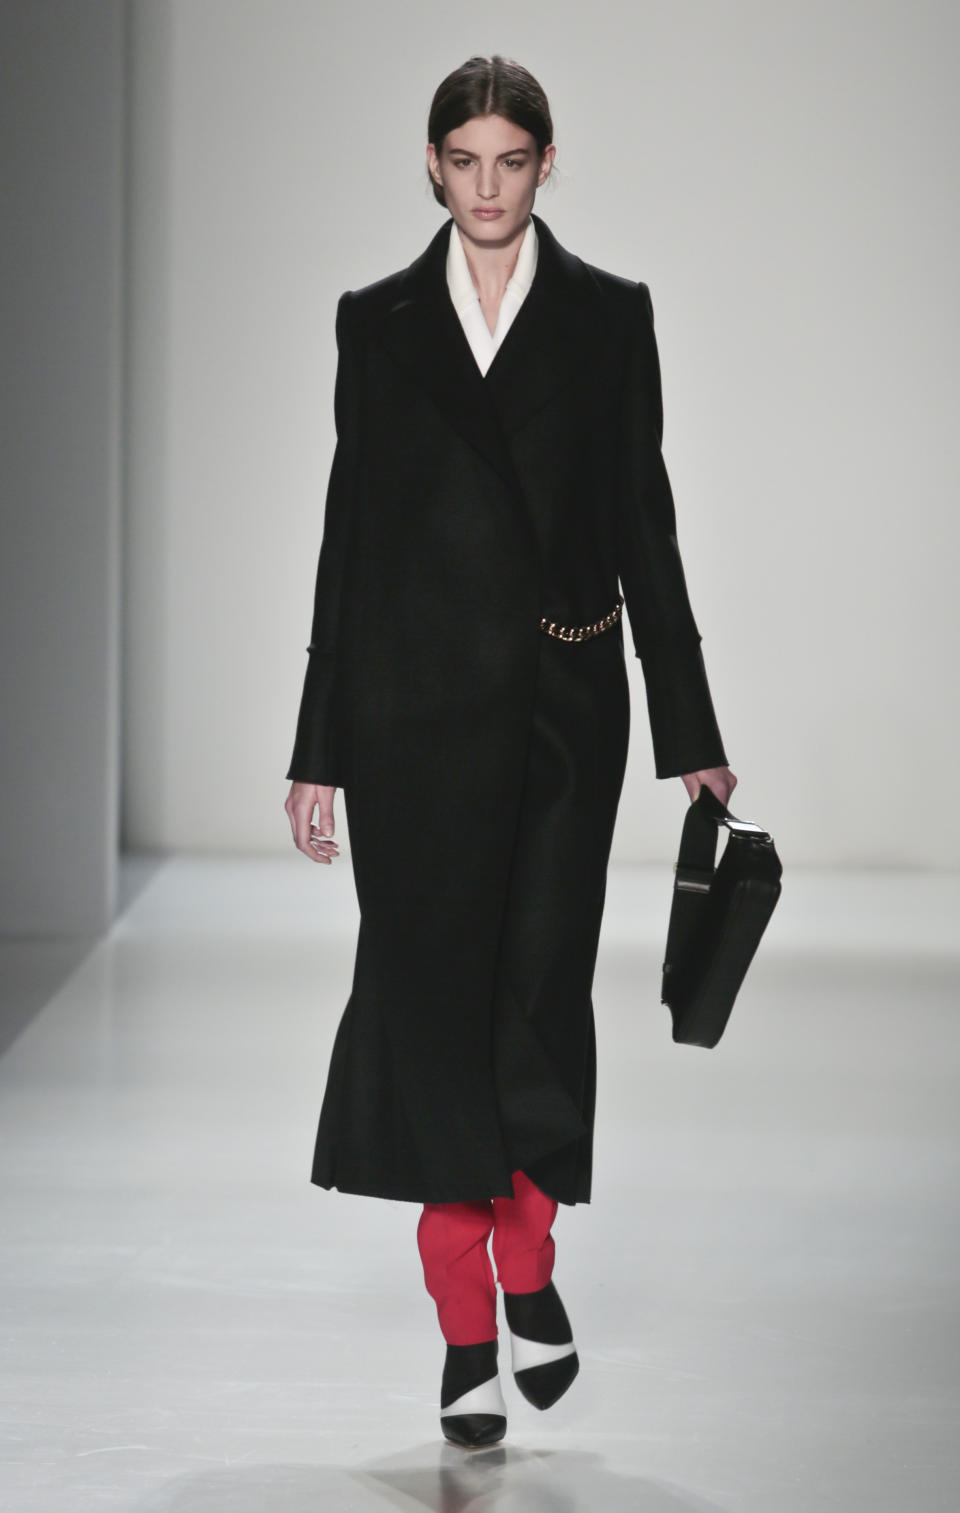 Fashion from the Victoria Beckham Fall 2014 collection is modeled, during New York Fashion Week on Sunday Feb. 9, 2014. (AP Photo/Bebeto Matthews)